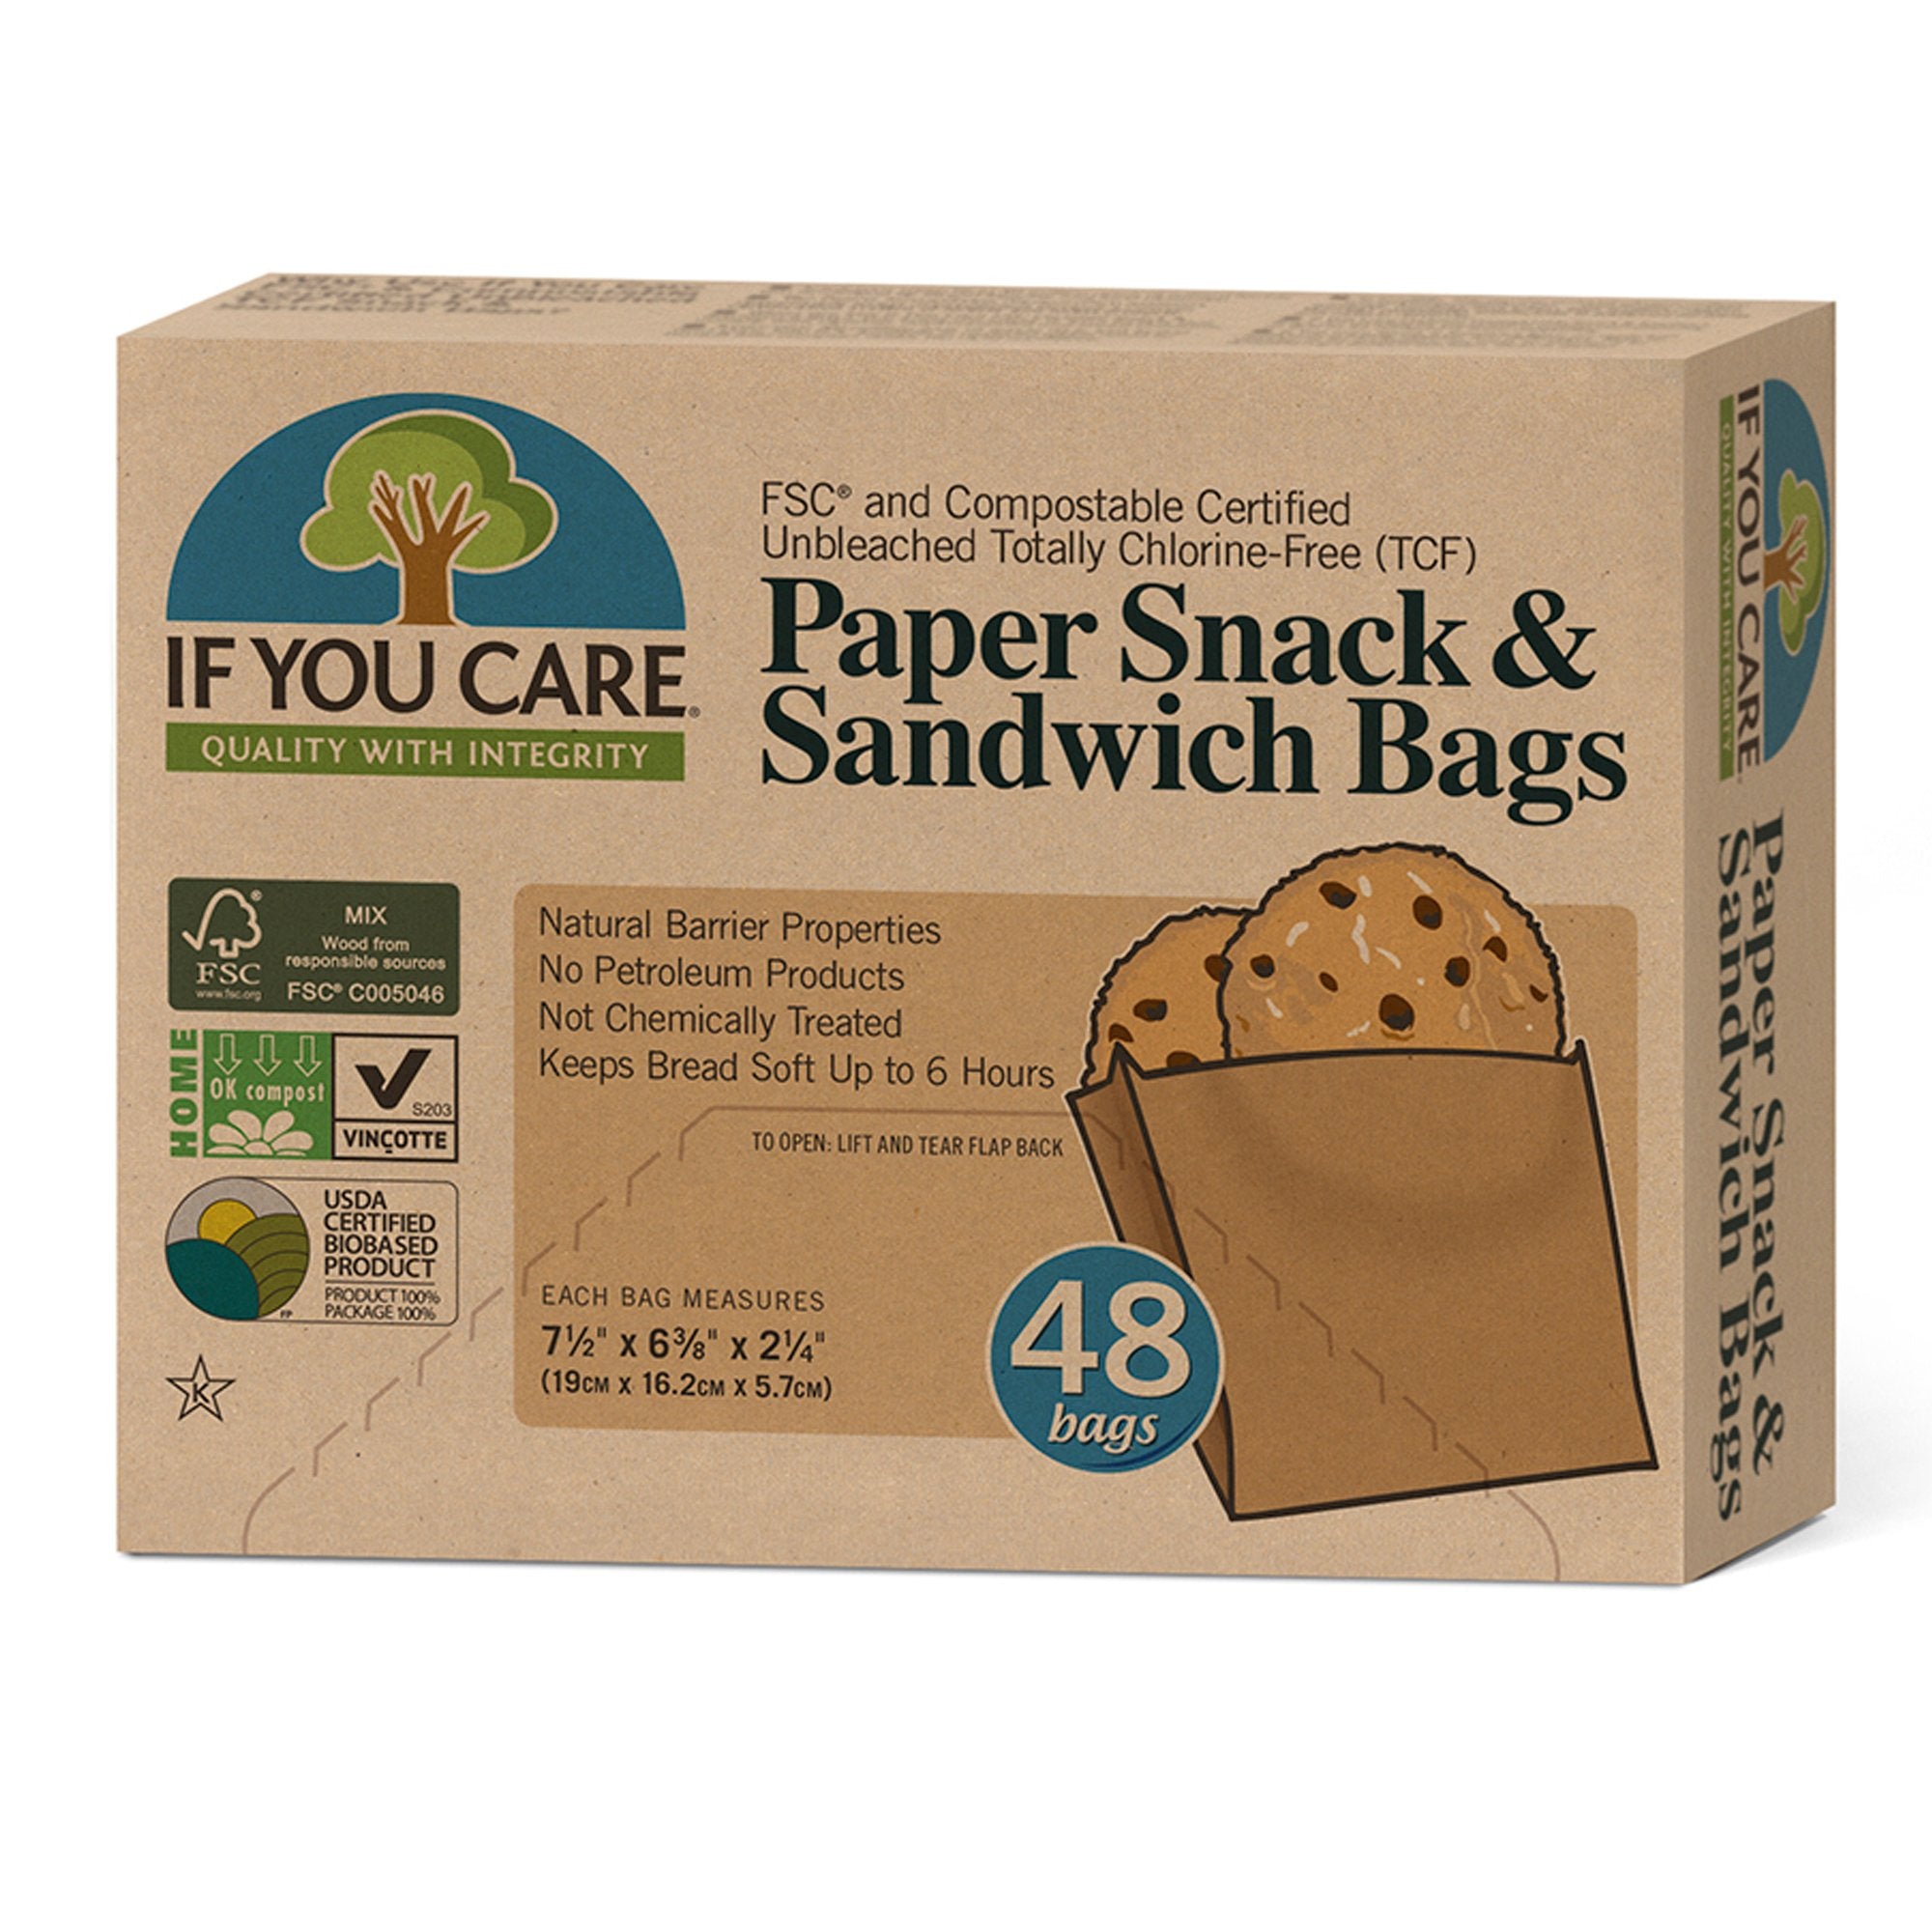 Grease-proof Wax Paper Bags for Sandwich and Snack